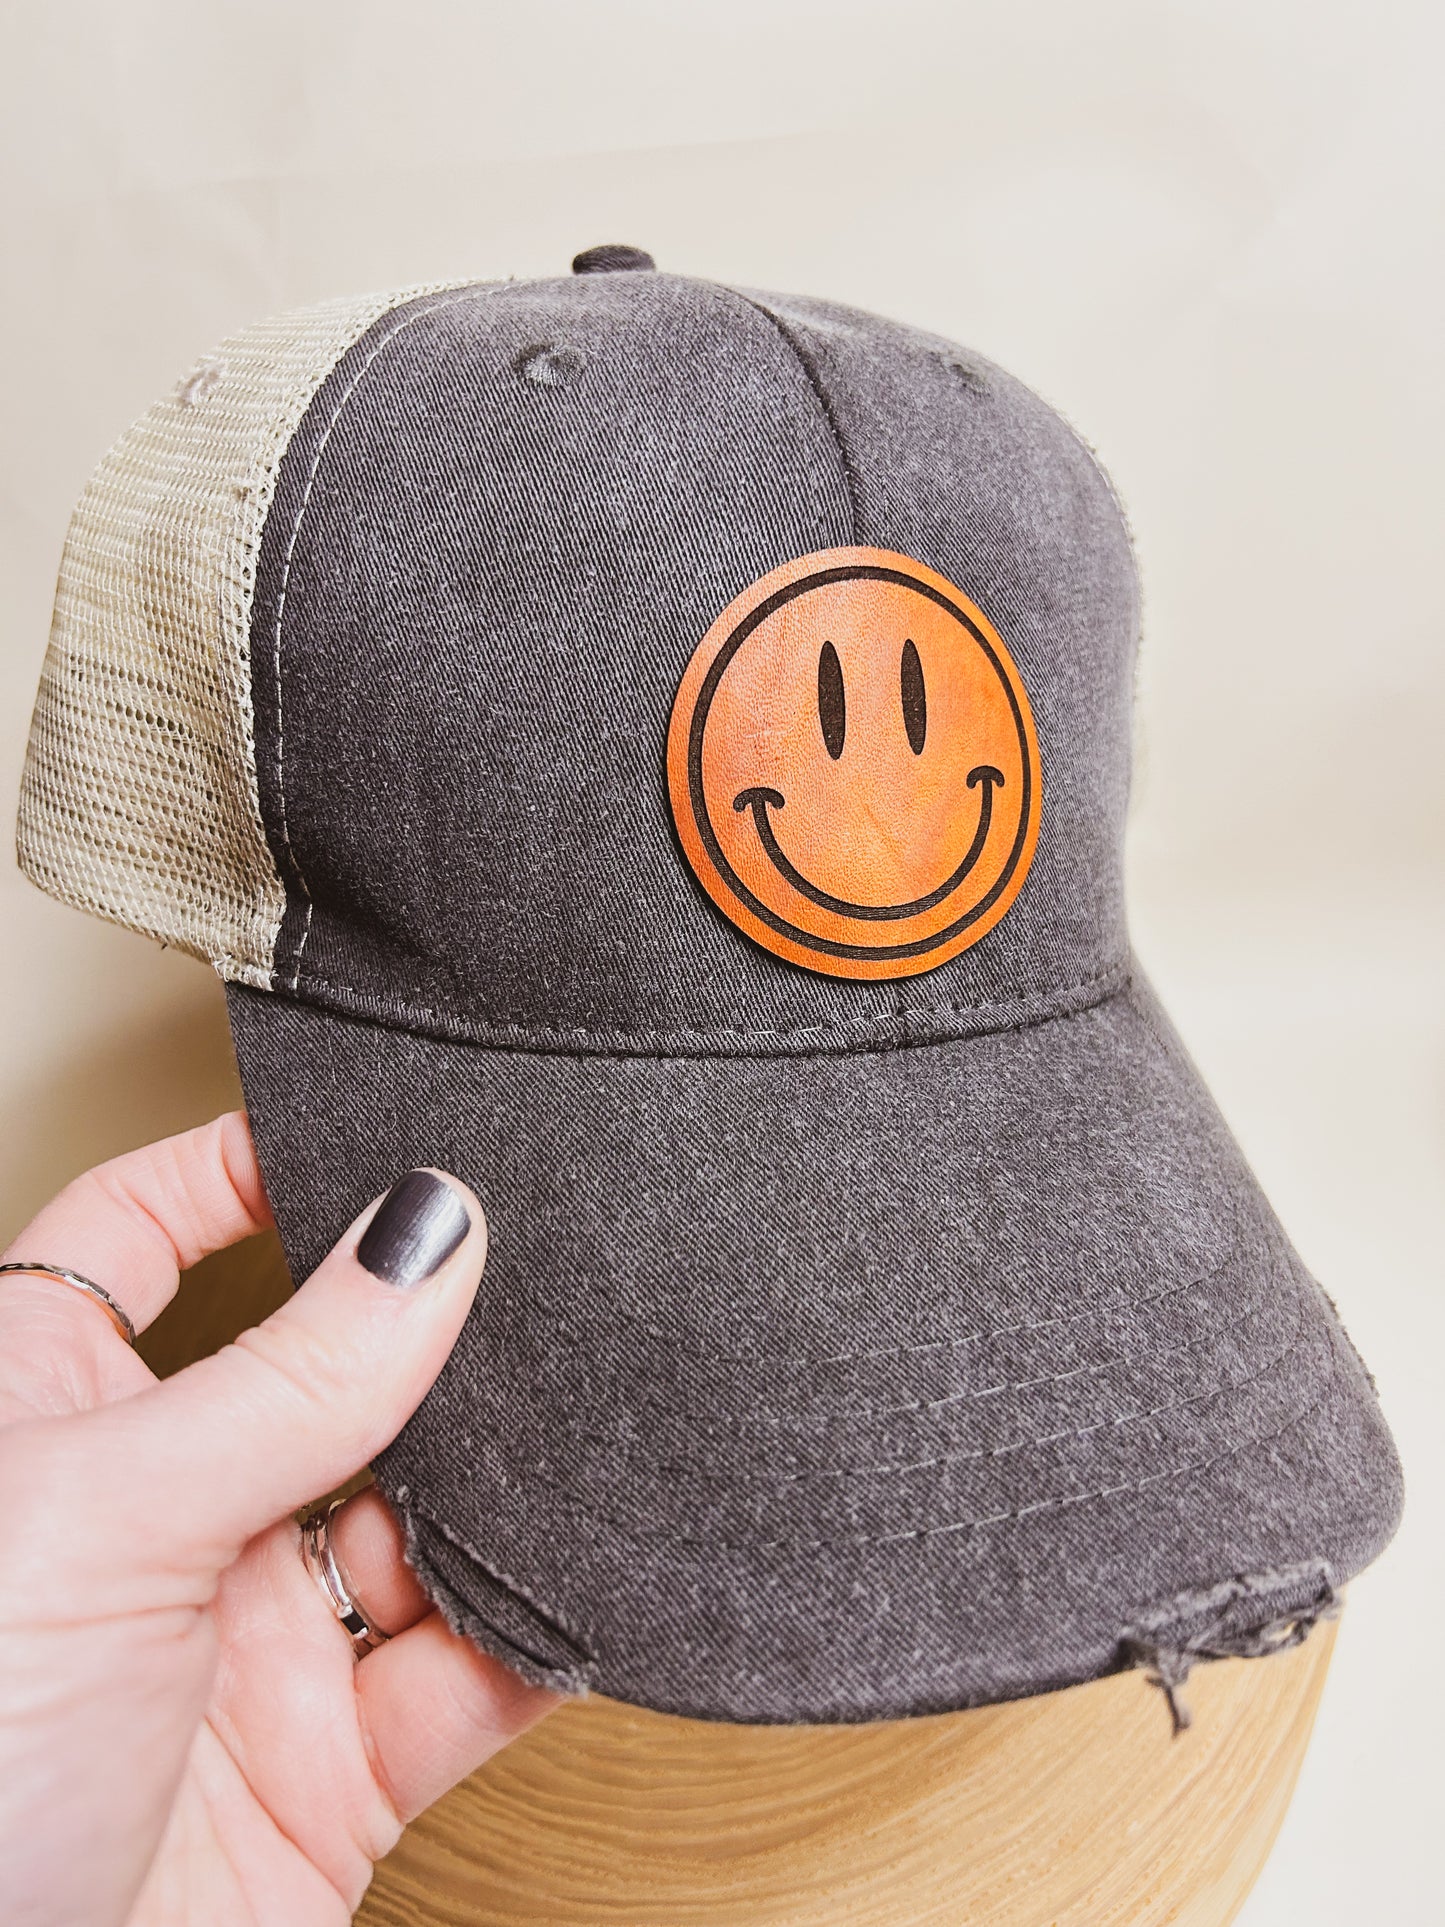 Happy Hat Patch on Distressed Hat